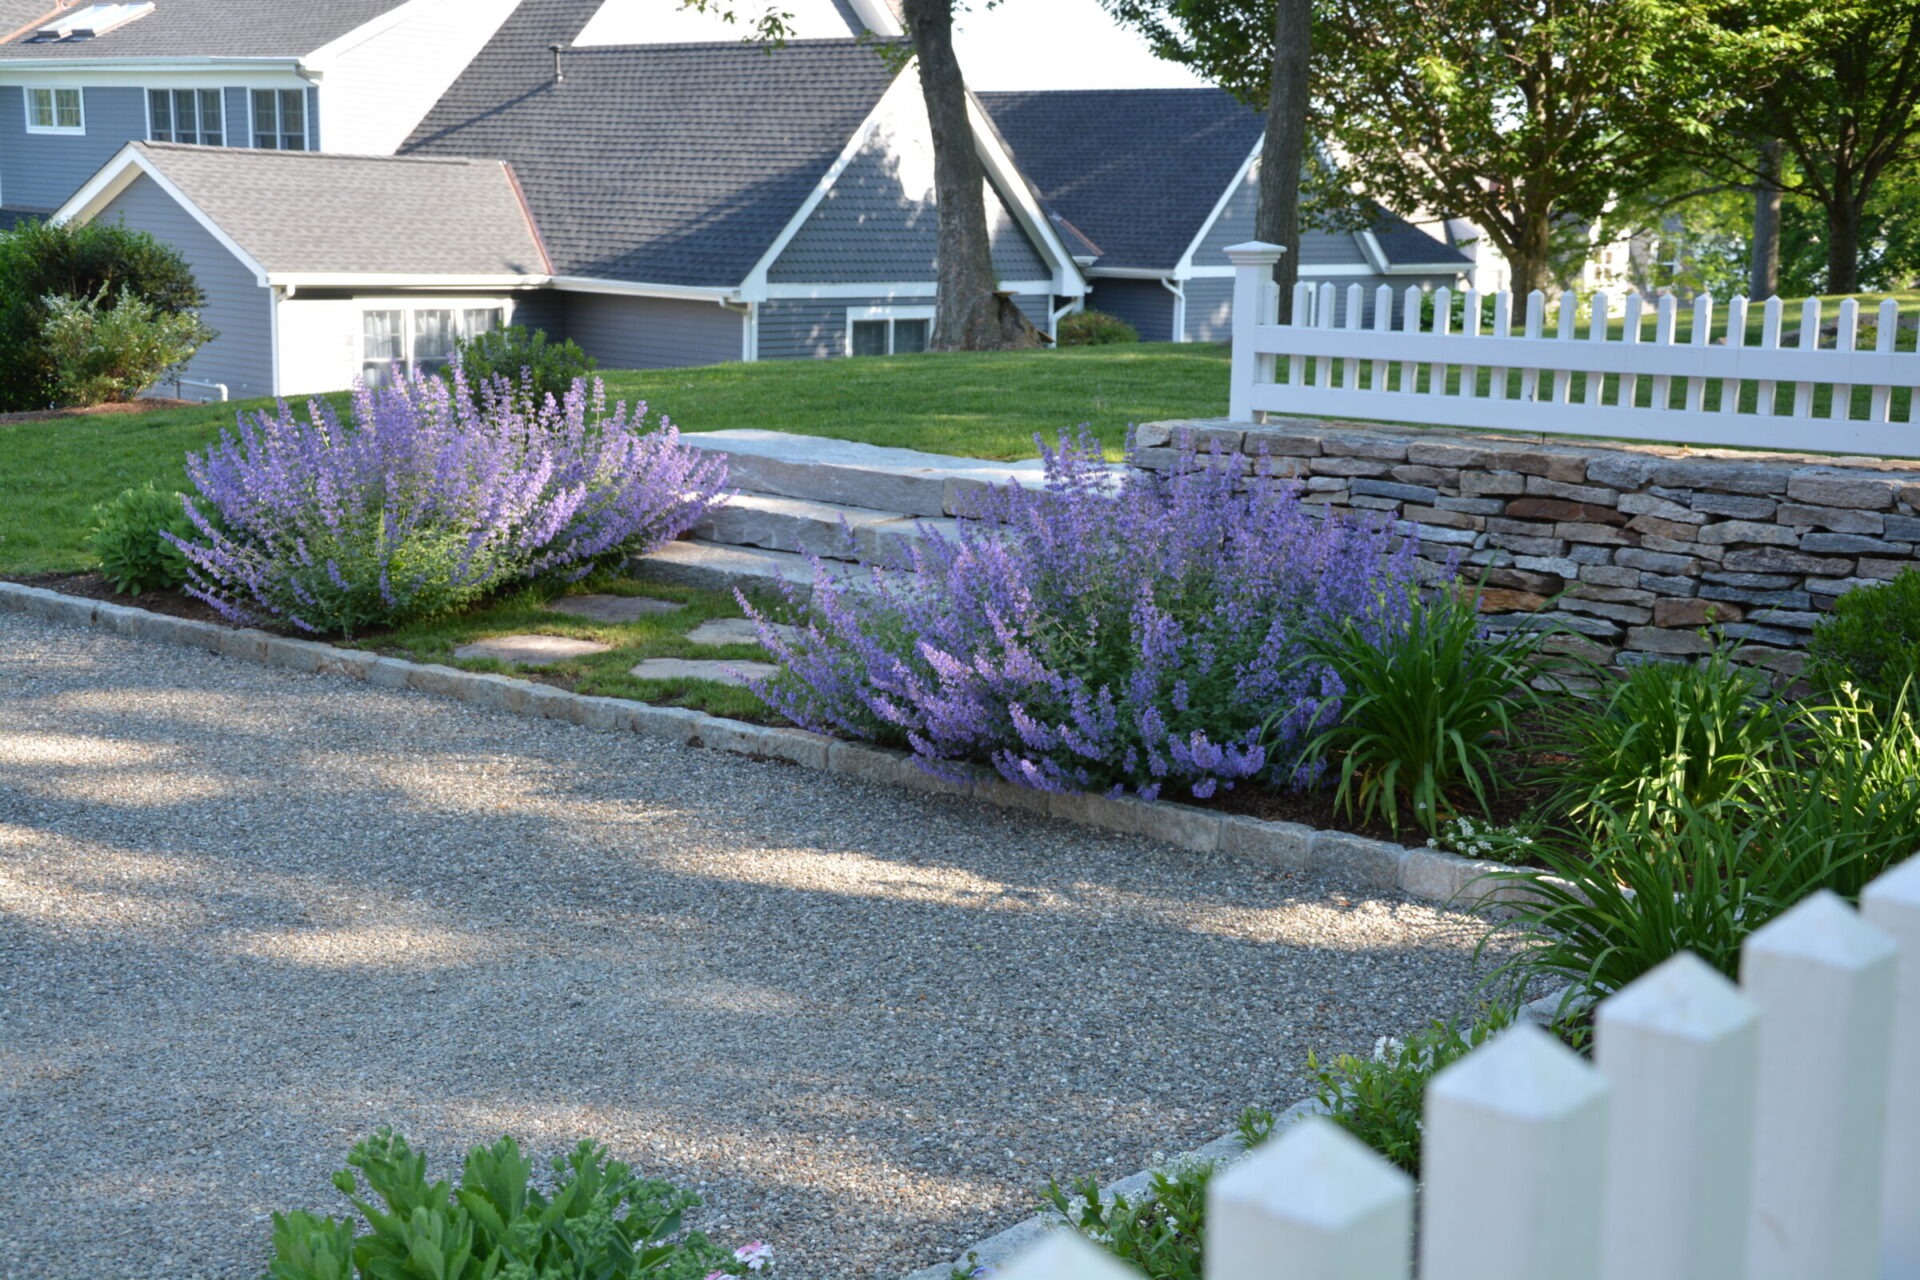 A suburban setting with a gravel driveway, flowering shrubs, stone retaining wall, white picket fence, and houses in the background on a sunny day.